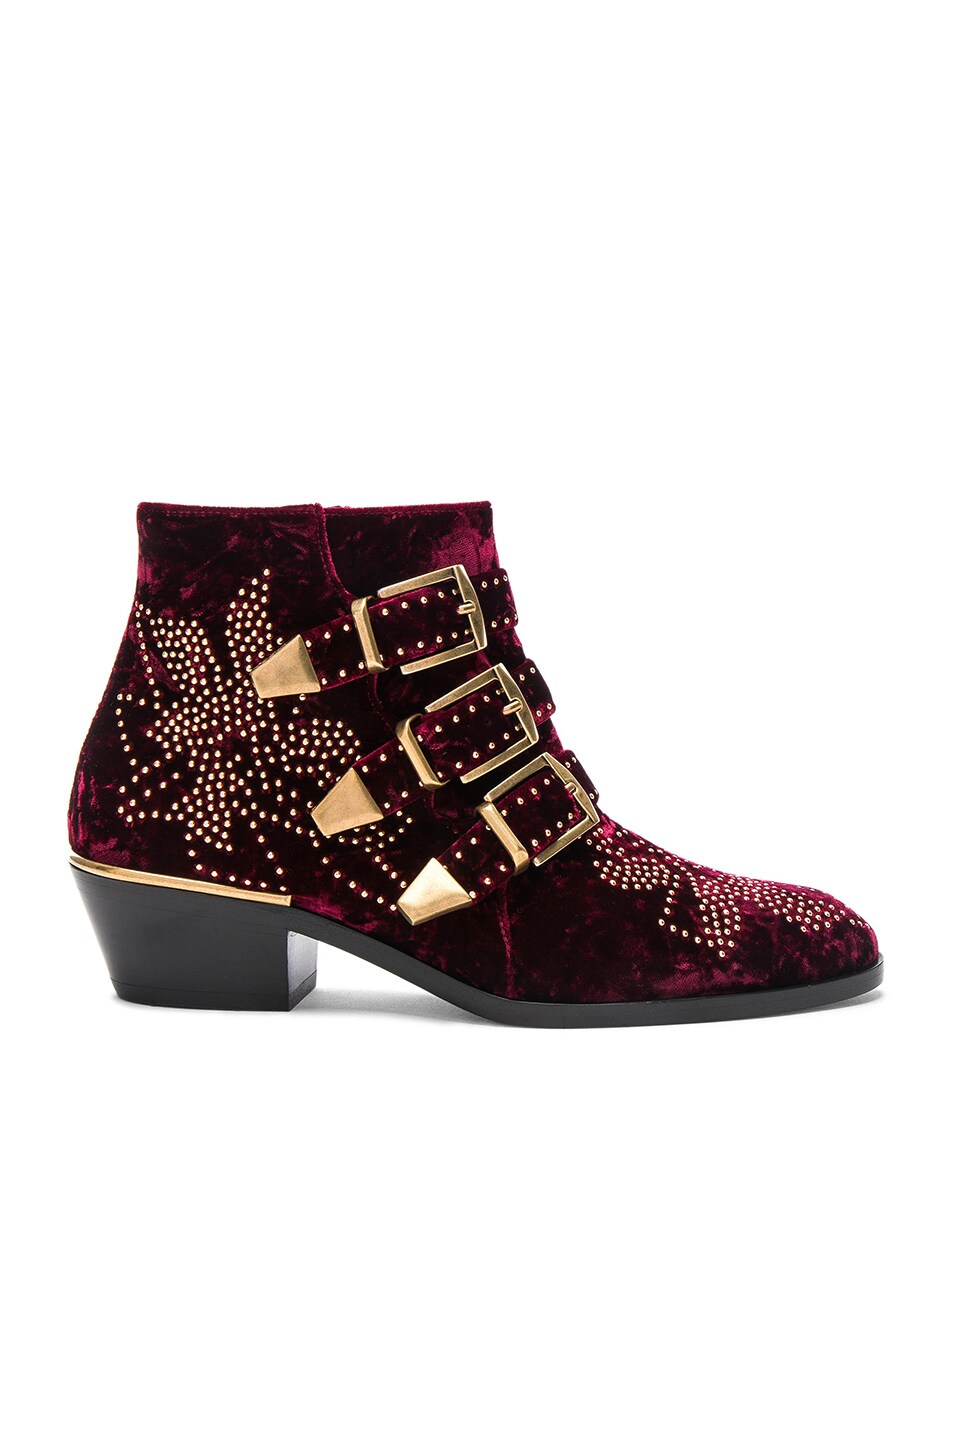 Image 1 of Chloe Studded Textured Velvet  Susanna Booties in Red Purple